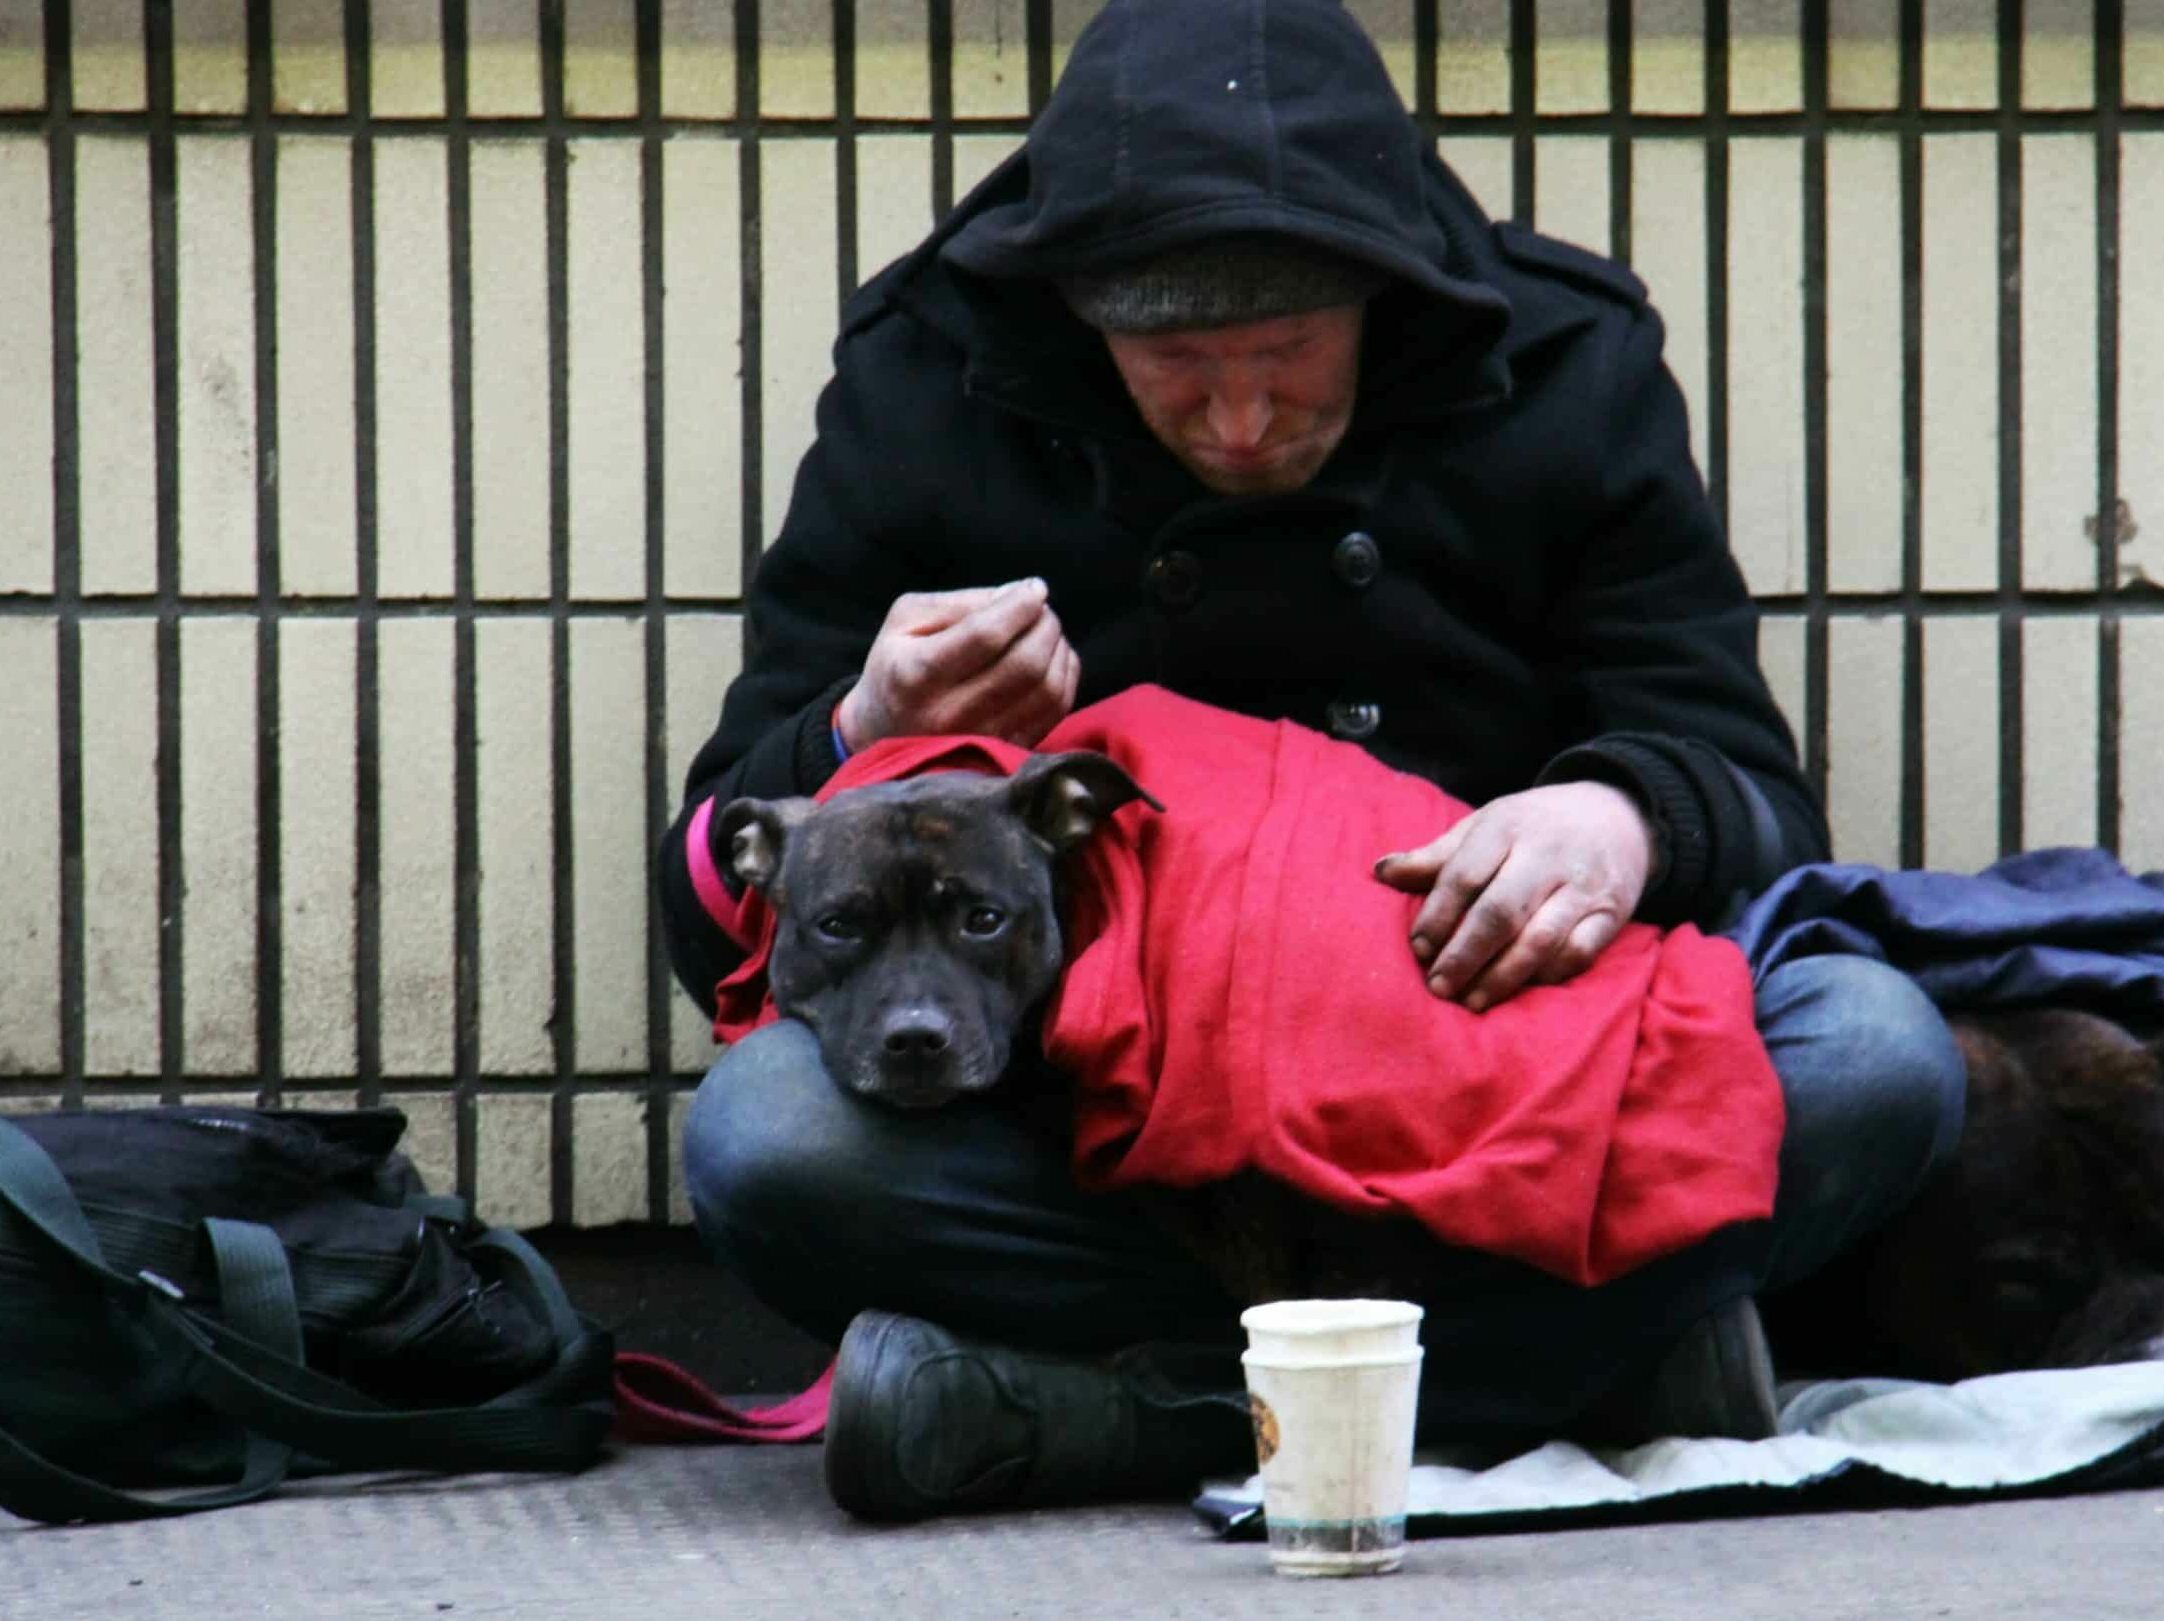 I was working in London and came across this homeless man on the street.  As I went to take this photograph to raise the plight of the homeless, his dog looked right at me with such sorrowful eyes.  It was then that I noticed the larger dog, curled up beside him.  I went to a local store, bought some dog food and him a BK Meal and drink.  Since then, each year, rather than buying Christmas cards for family and friends, I always donate enough money to give a homeless person a shower, clothes and cooked meal and a place to stay on Christmas Day, via the UK charity, Crisis.